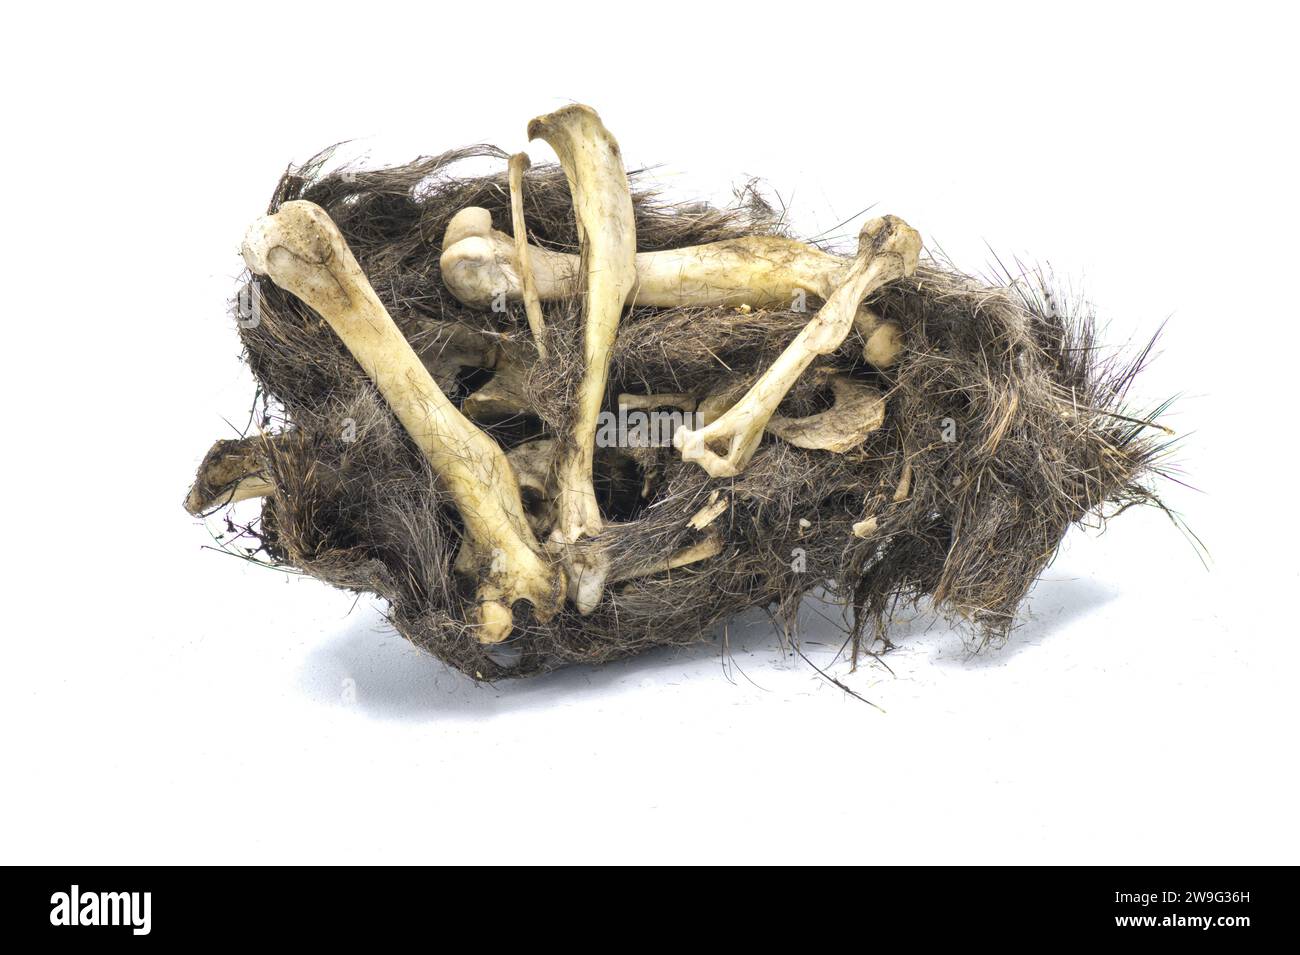 Owl pellet. An Owl's regurgitated remains of undigested prey bones likely of a mouse or small rodent.  Broken open version. Isolated on white backgrou Stock Photo